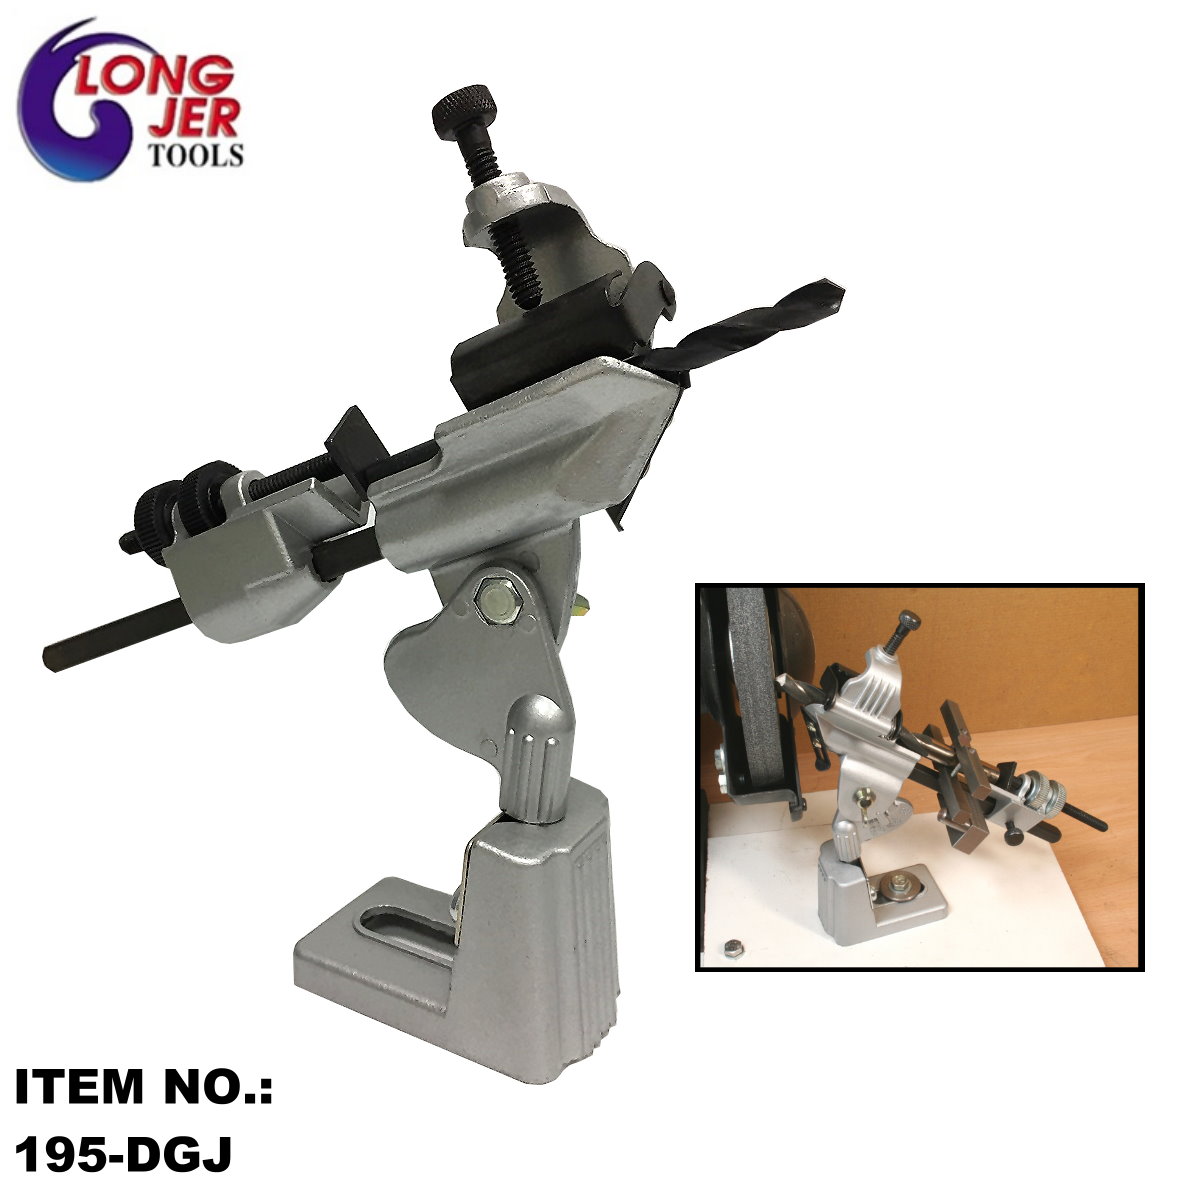 DRILL BIT GRINDER ATTACHMENT FOR HARDWARE TOOLS